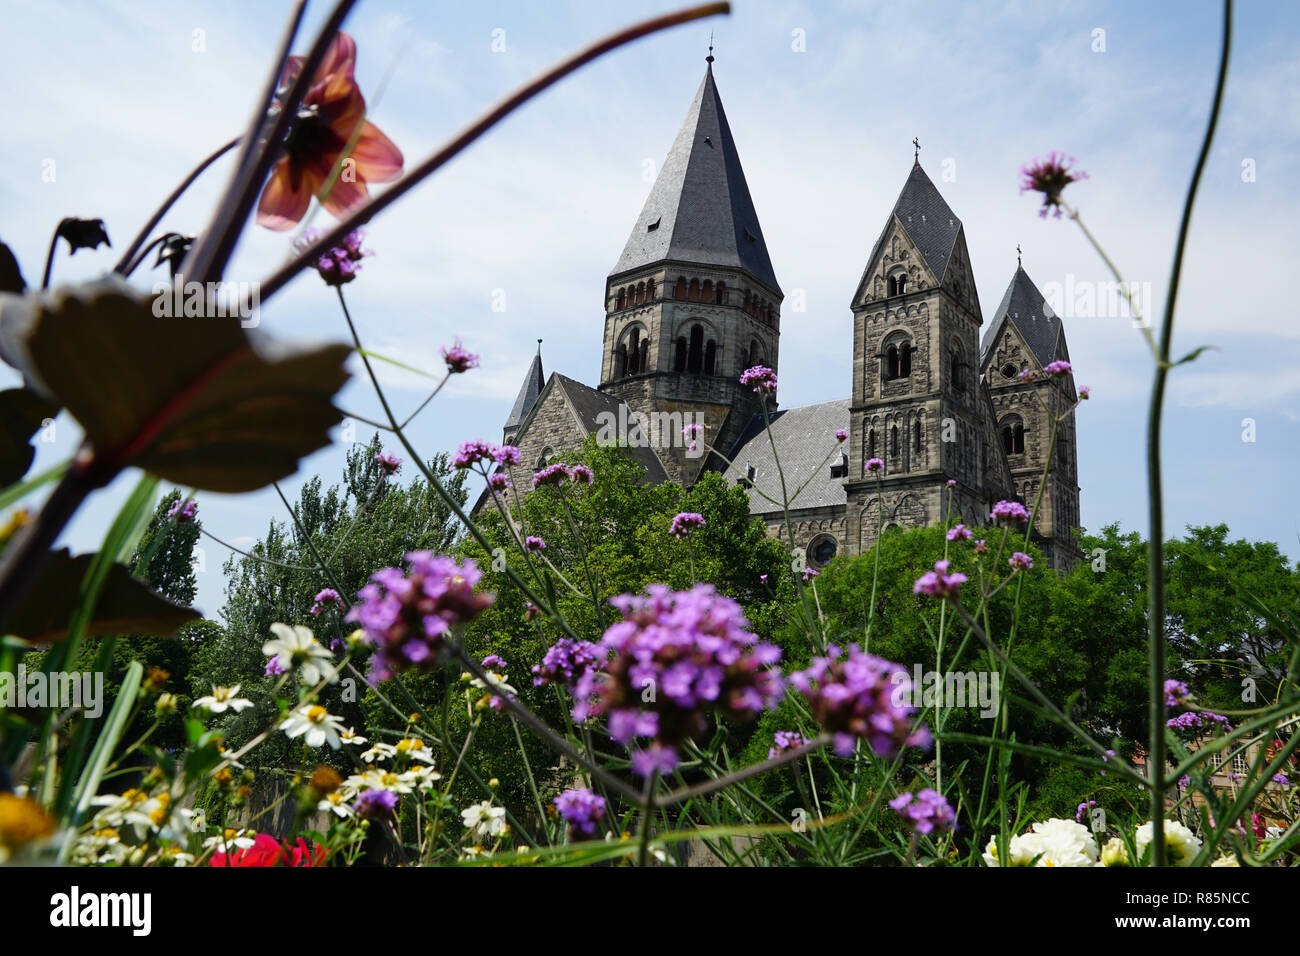 Church Eglise du Temple Neuf with flowers in the foreground, Metz, France Stock Photo